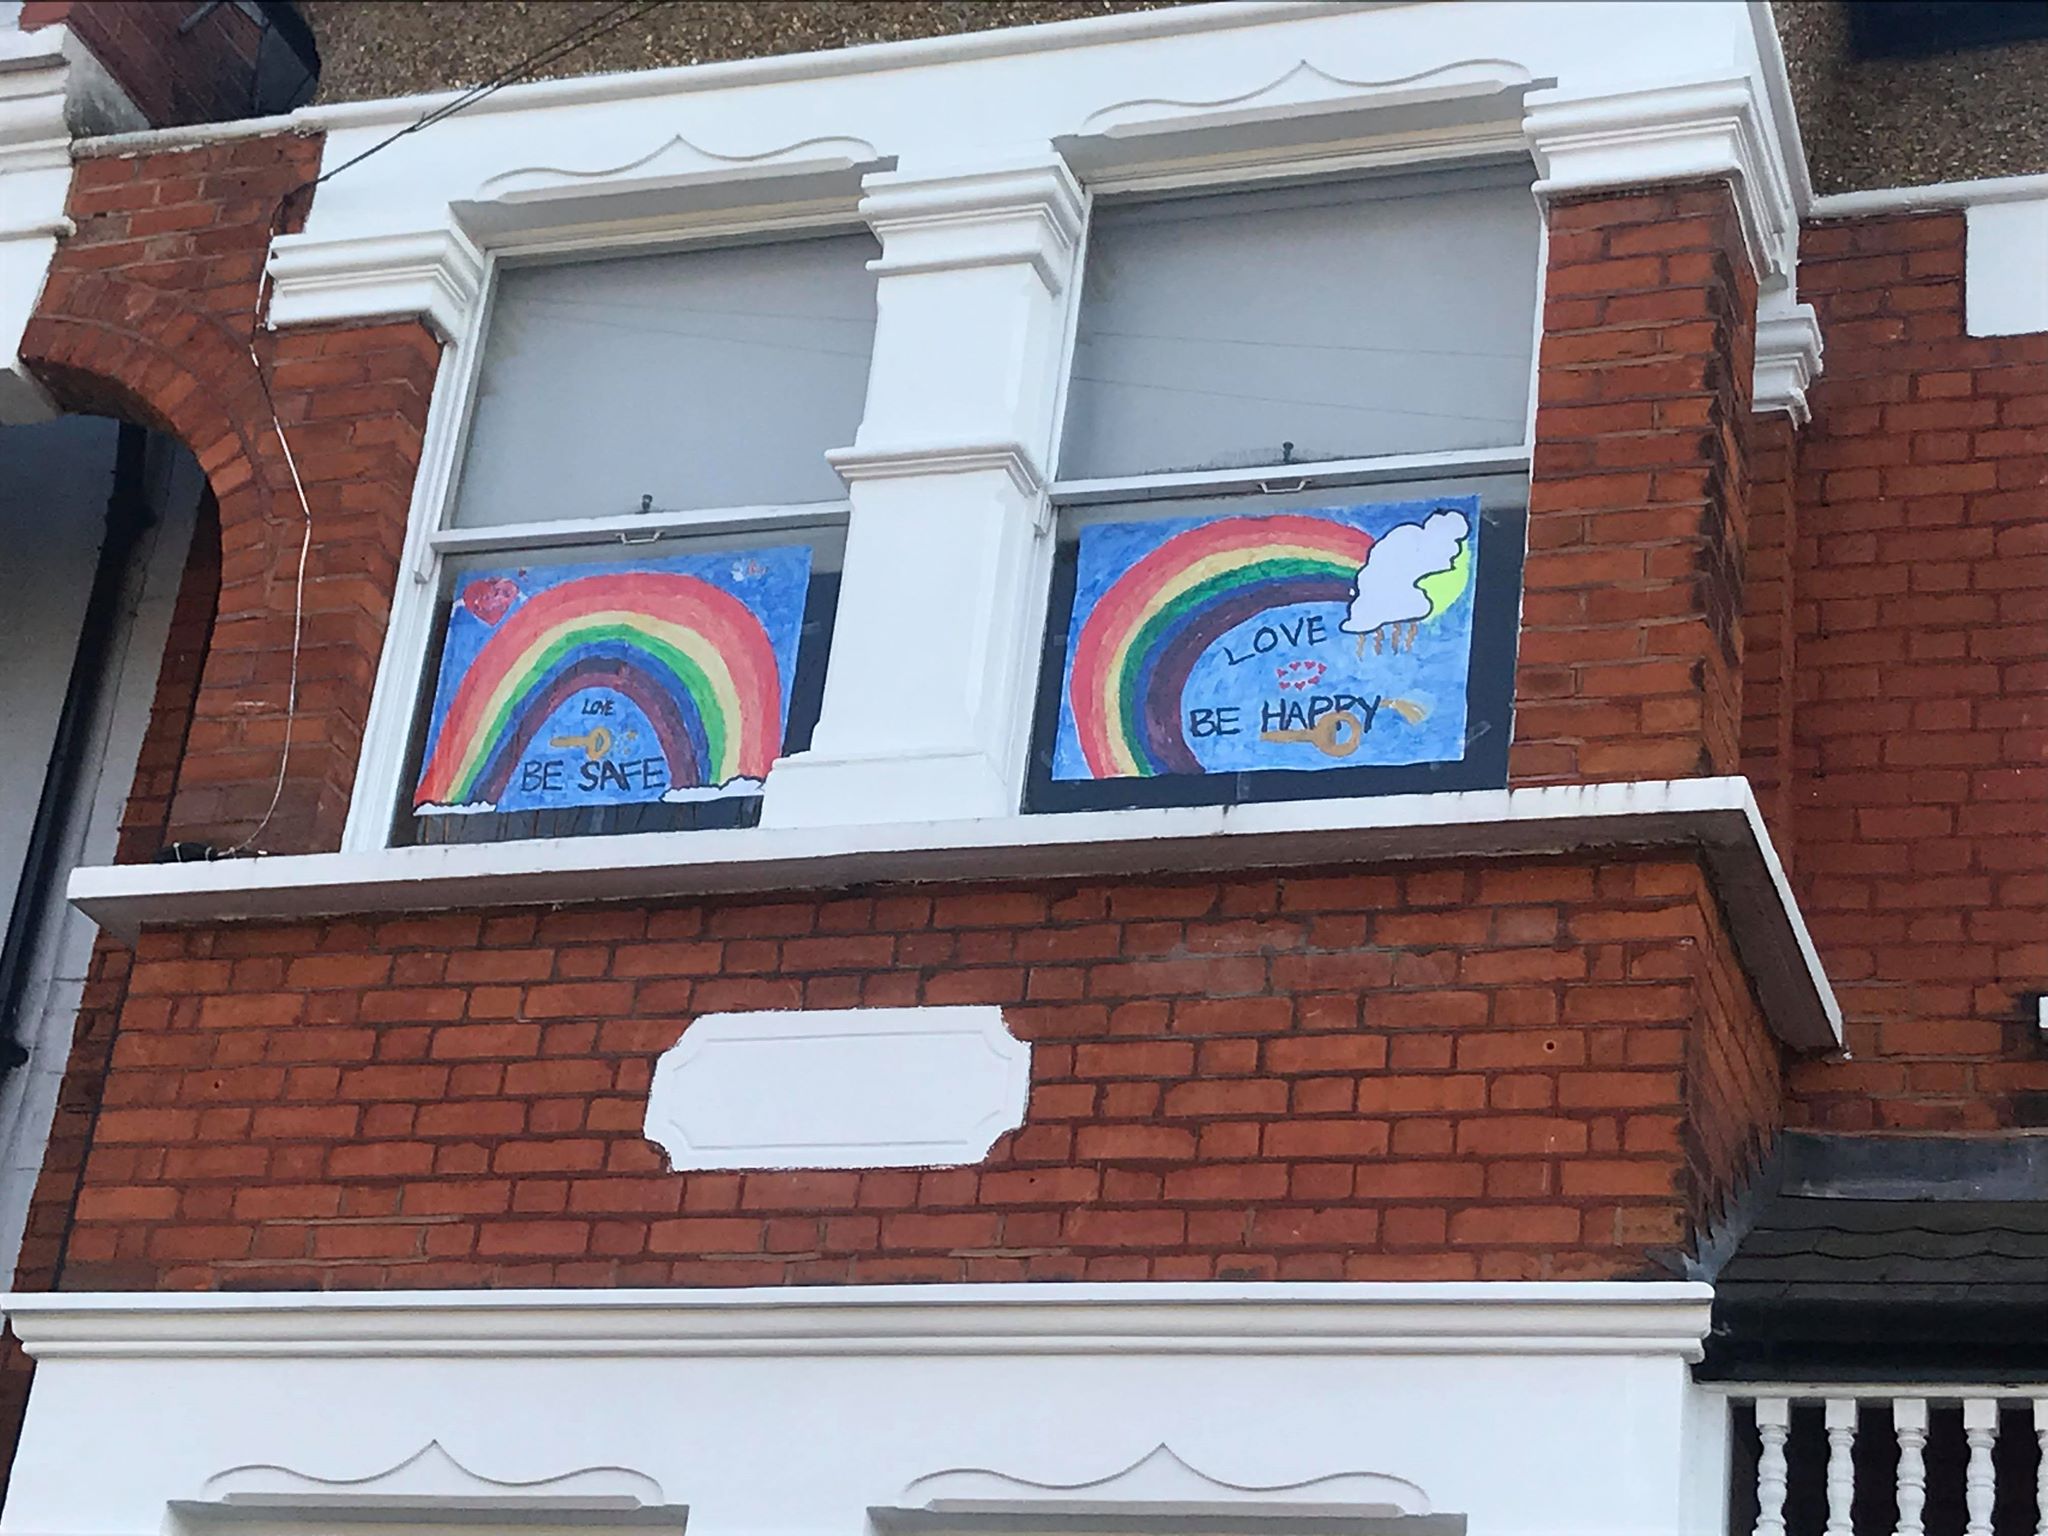 Children's drawings of rainbows stuck on windows for passers by 